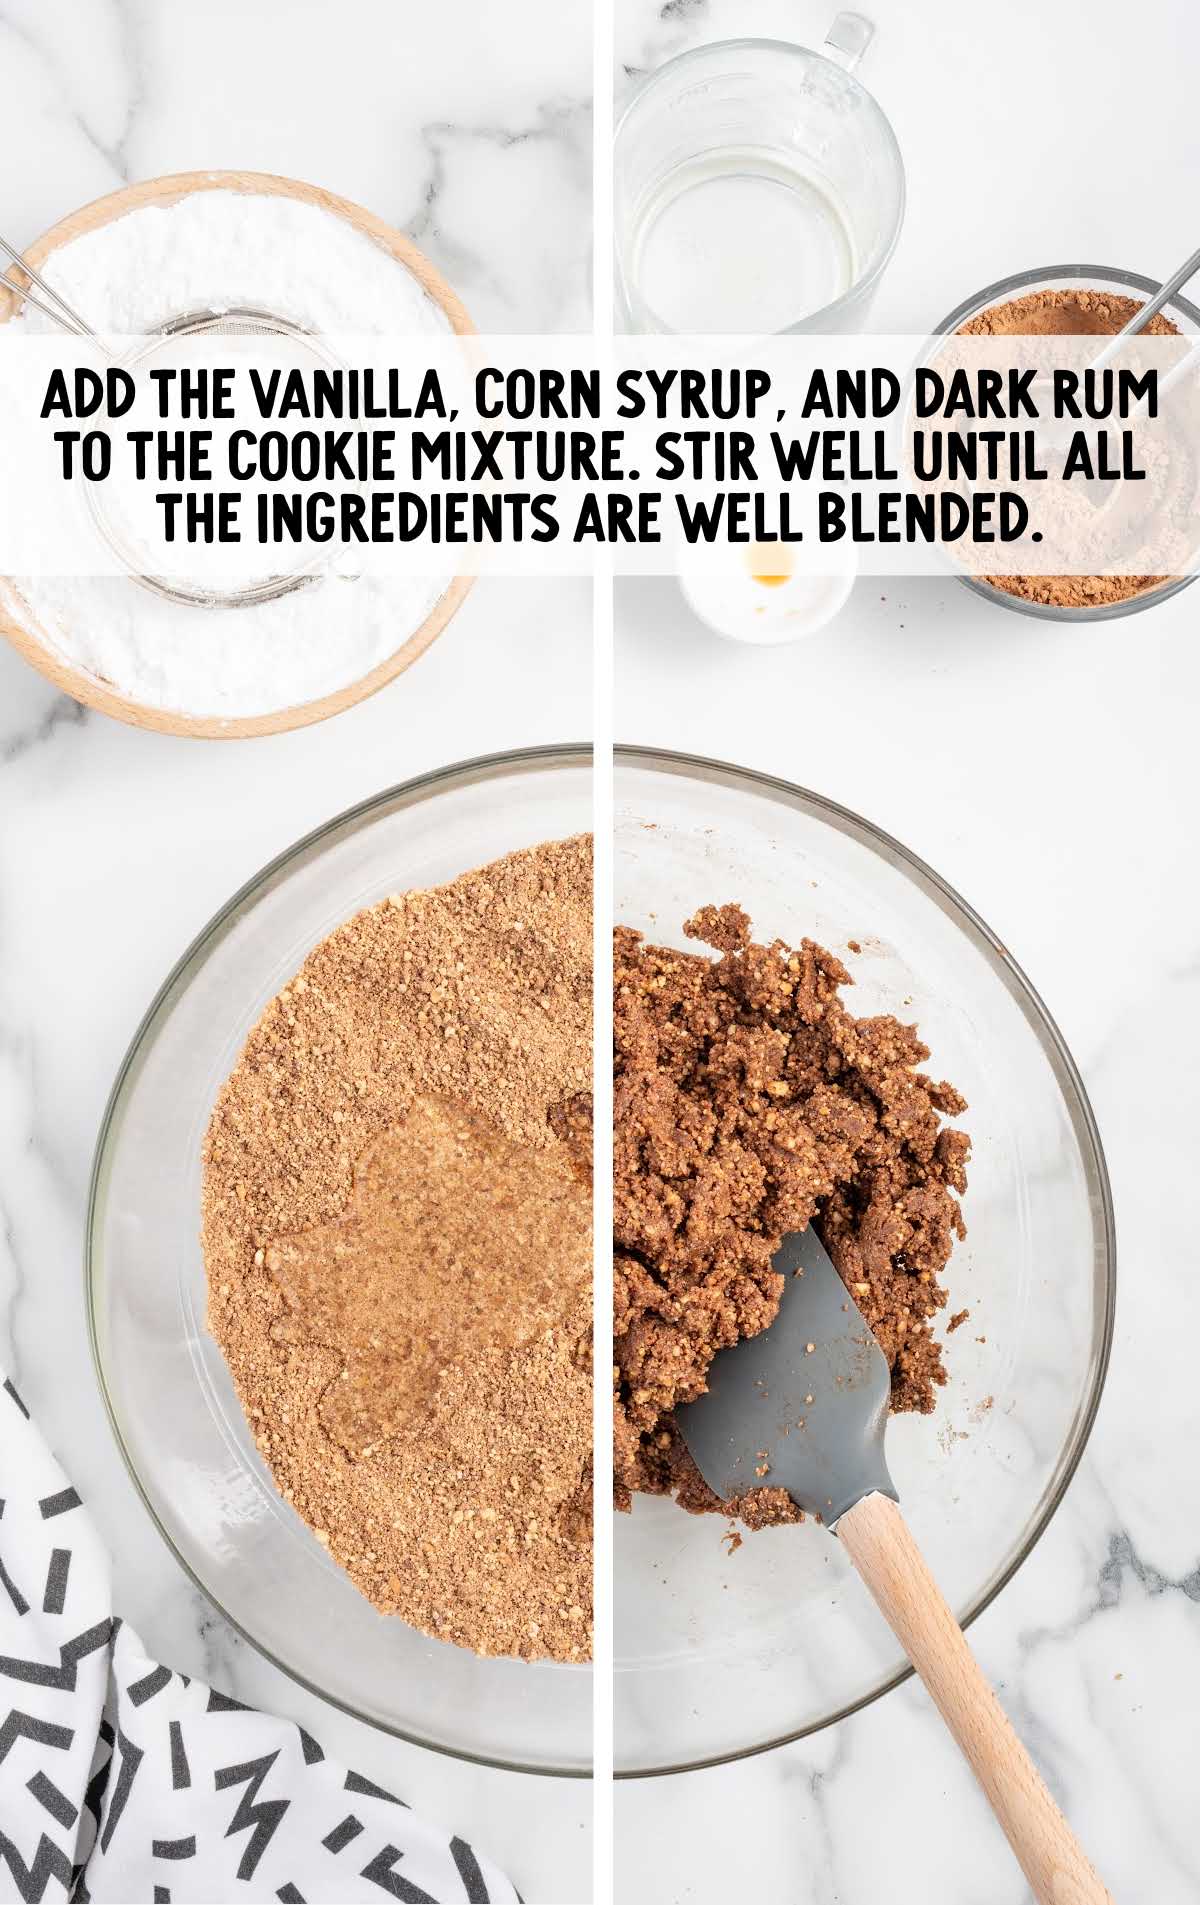 vanilla extract, light corn syrup, and dark rum combined in the bowl